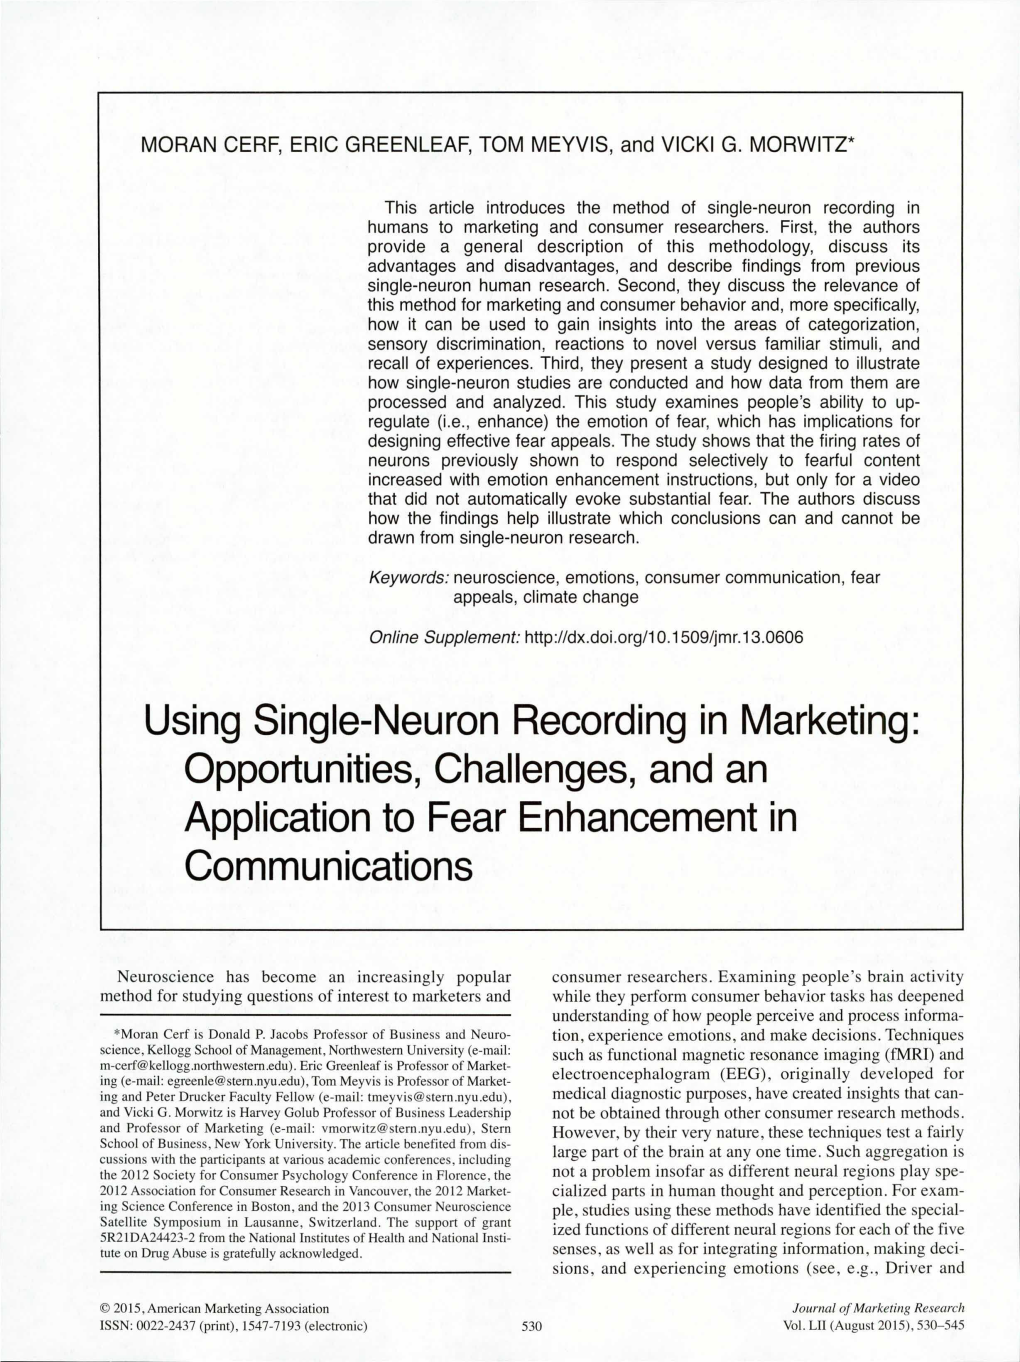 Using Single-Neuron Recording in Marketing: Opportunities, Challenges, and an Application to Fear Enhancement in Communications